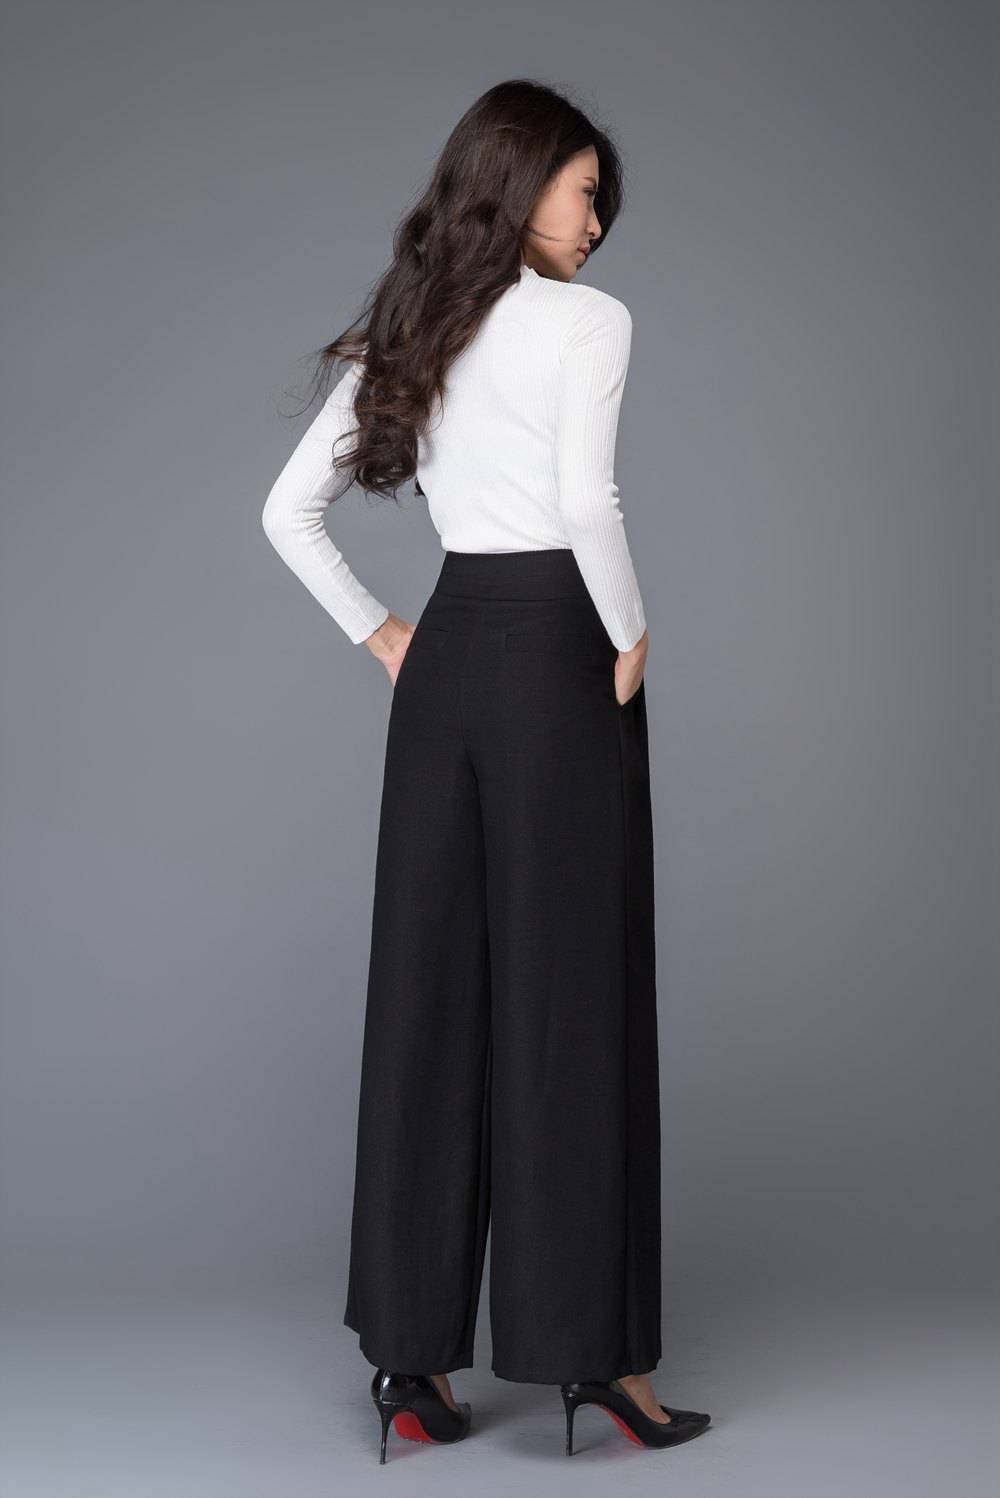 Wide Leg Wool Pants, Palazzo Trouser Pants, High Waisted Winter Pants, Wide  Wool Culottes, Plus Size Pants, Dark Academia Wool Clothing -  Canada